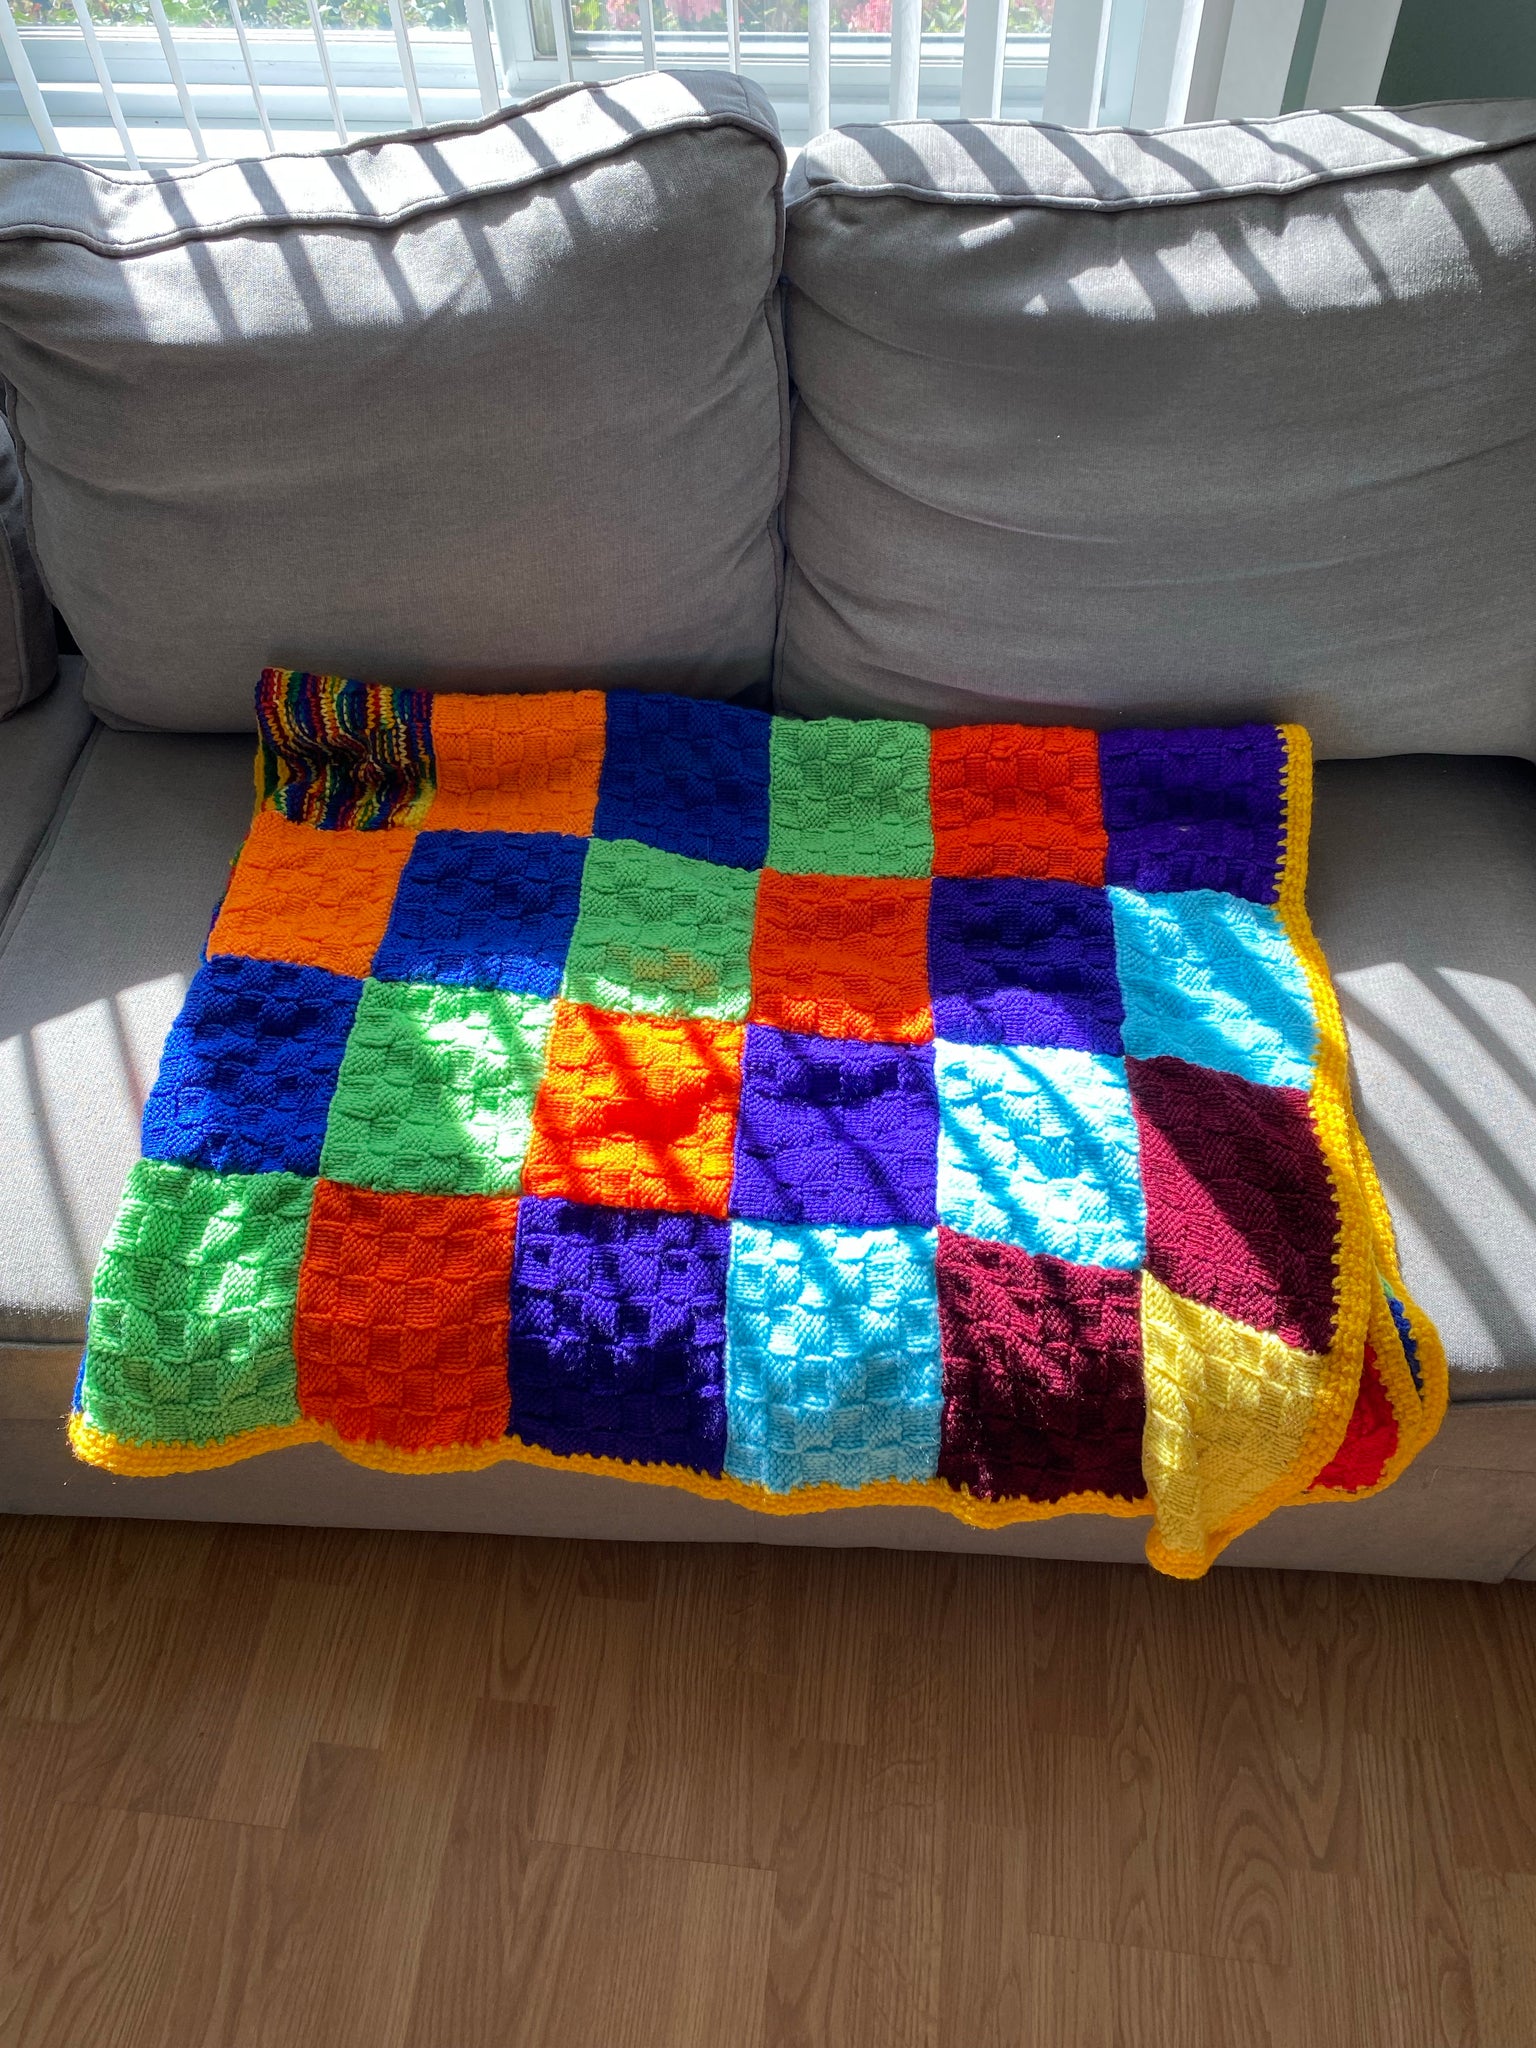 Colorful squares knitted blanket